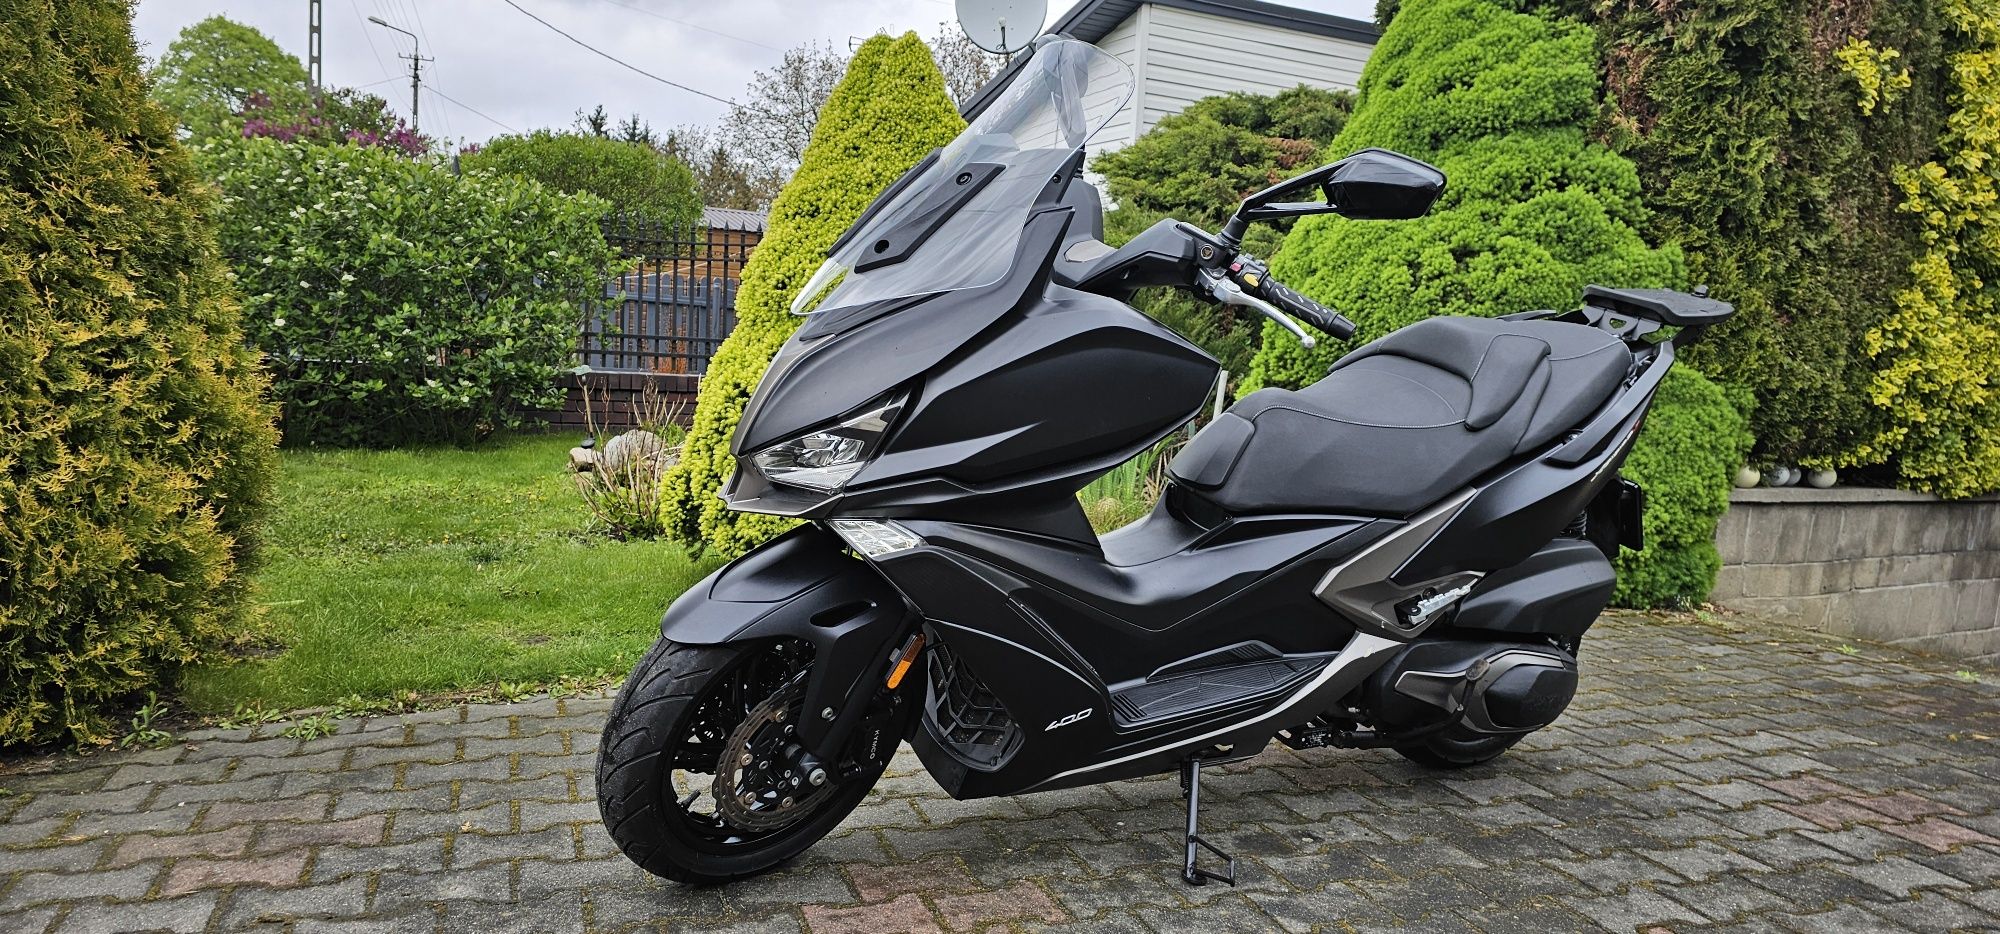 Kymco Xciting s 400 noode maxi skuter